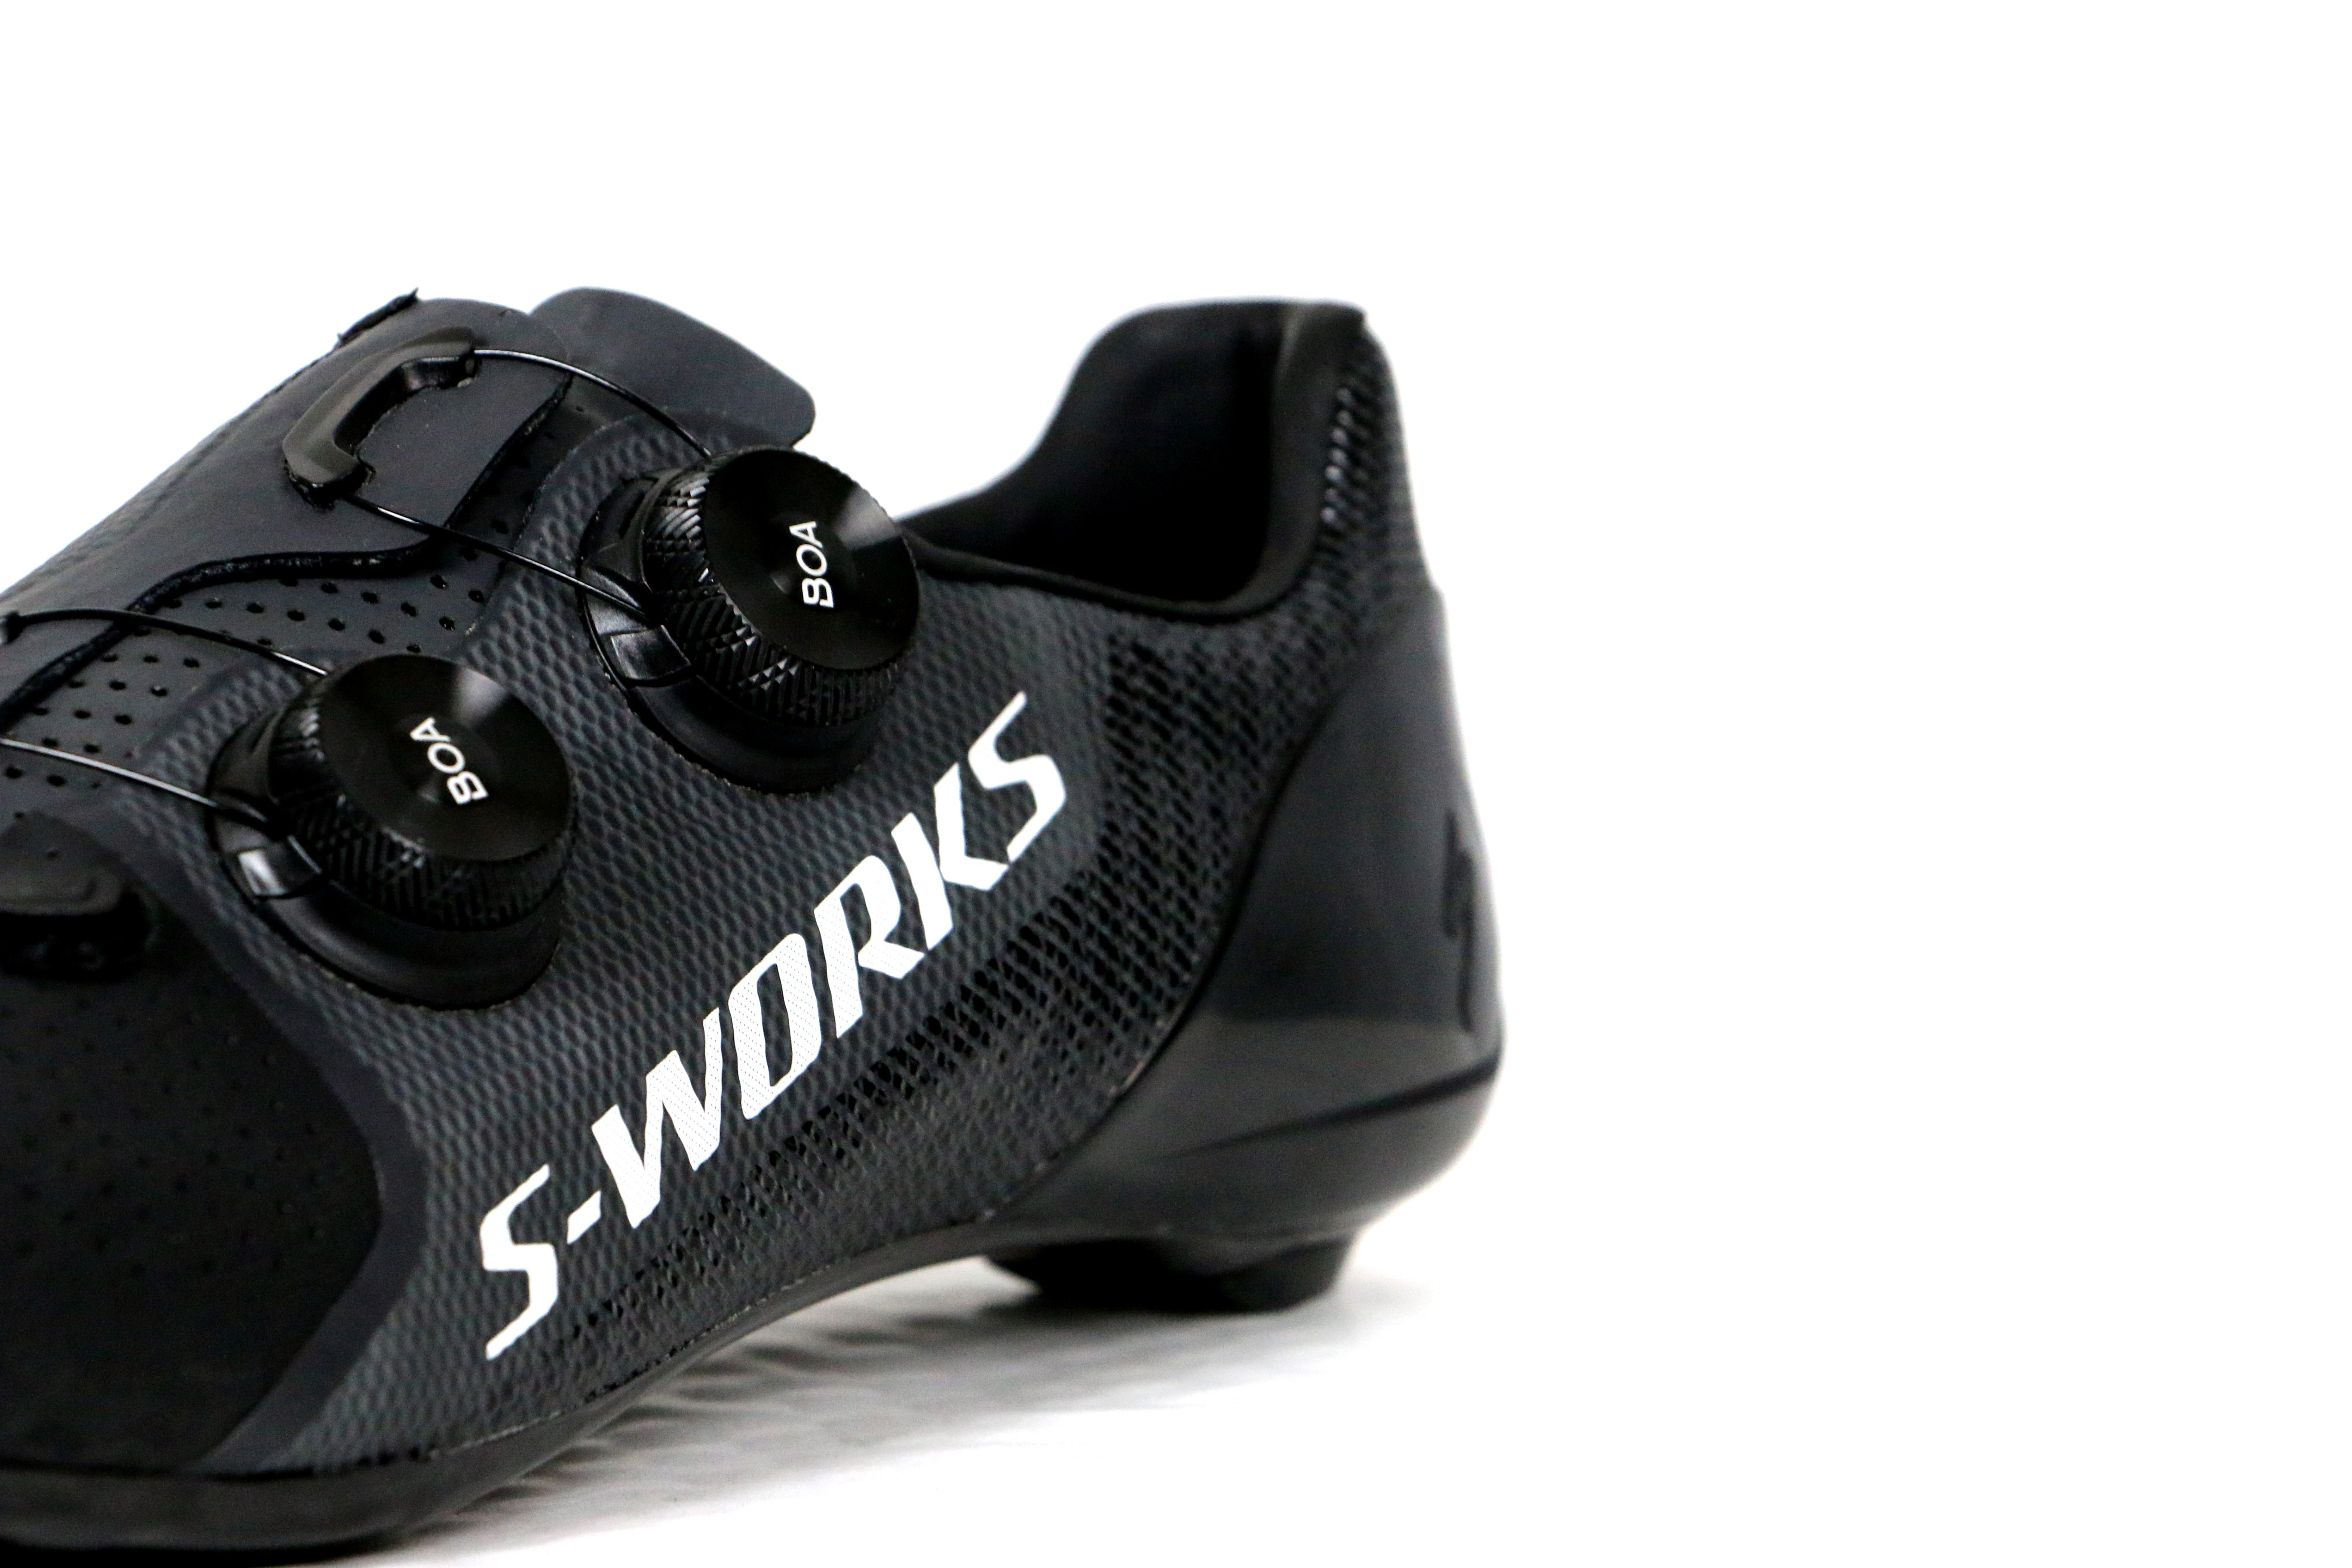 specialized s works 7 shoes review